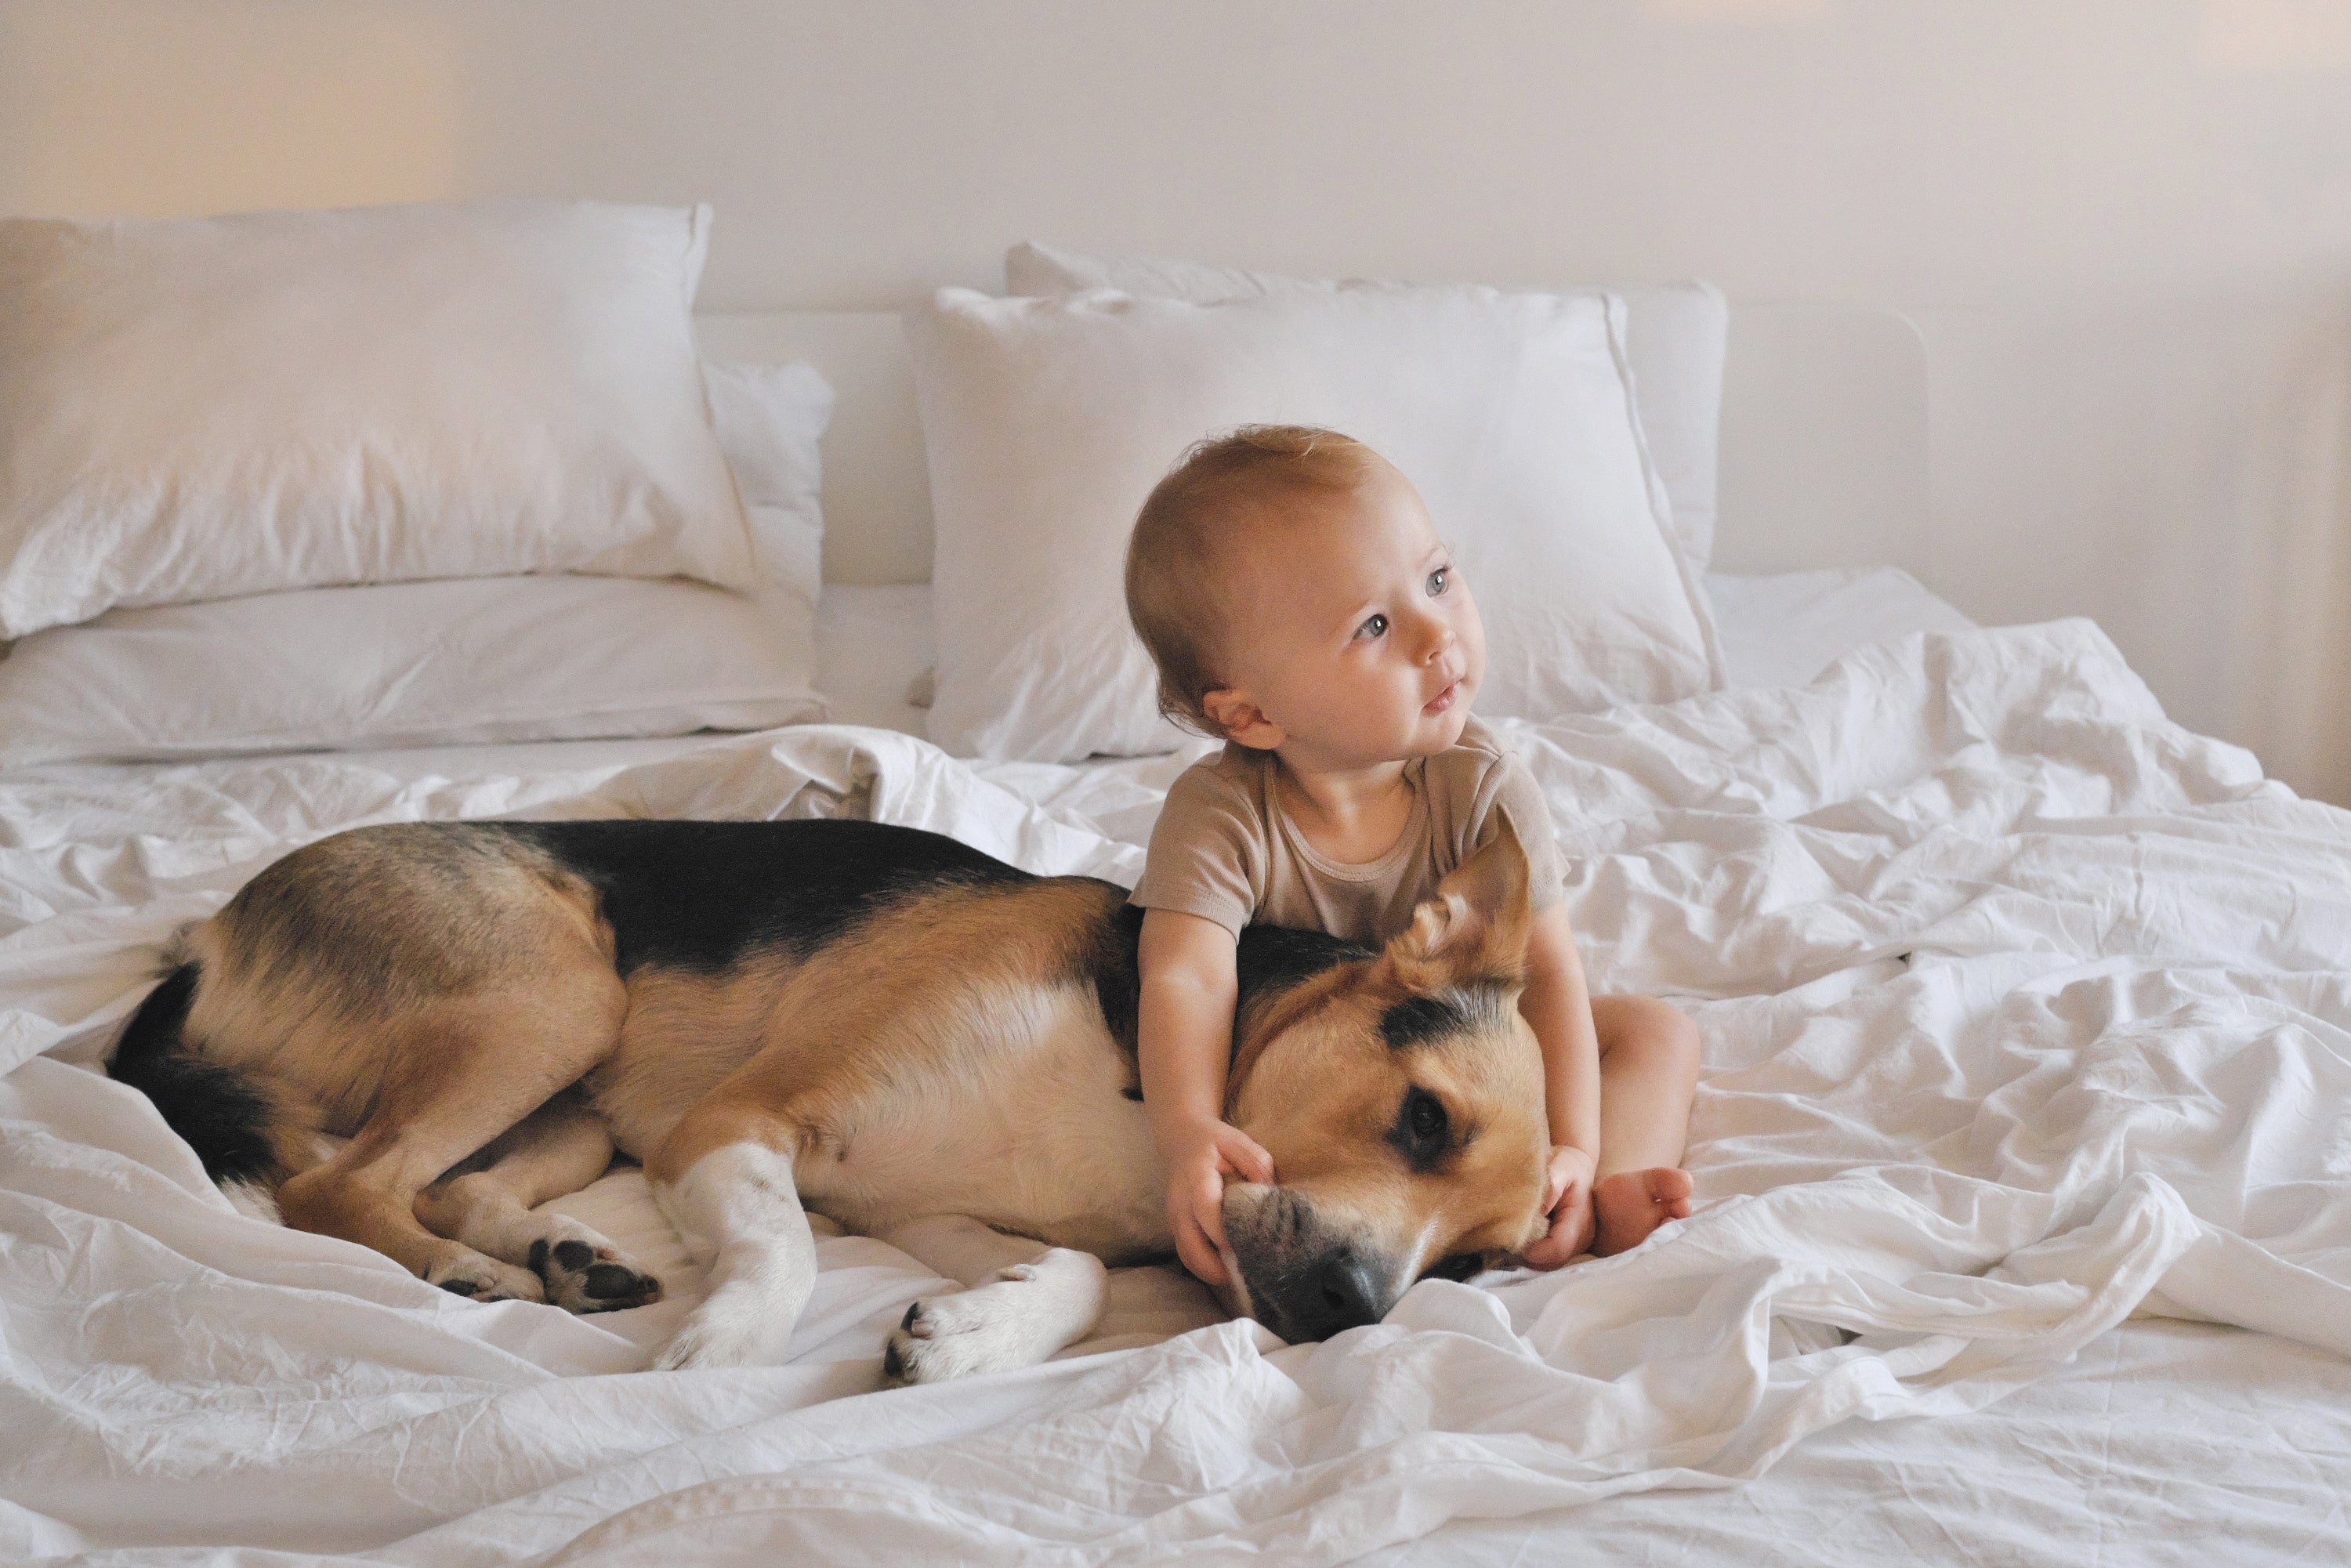 A baby and a German shepherd dog sitting together on a bed during heat wave. Concept of keeping kids and pets indoors during summer.